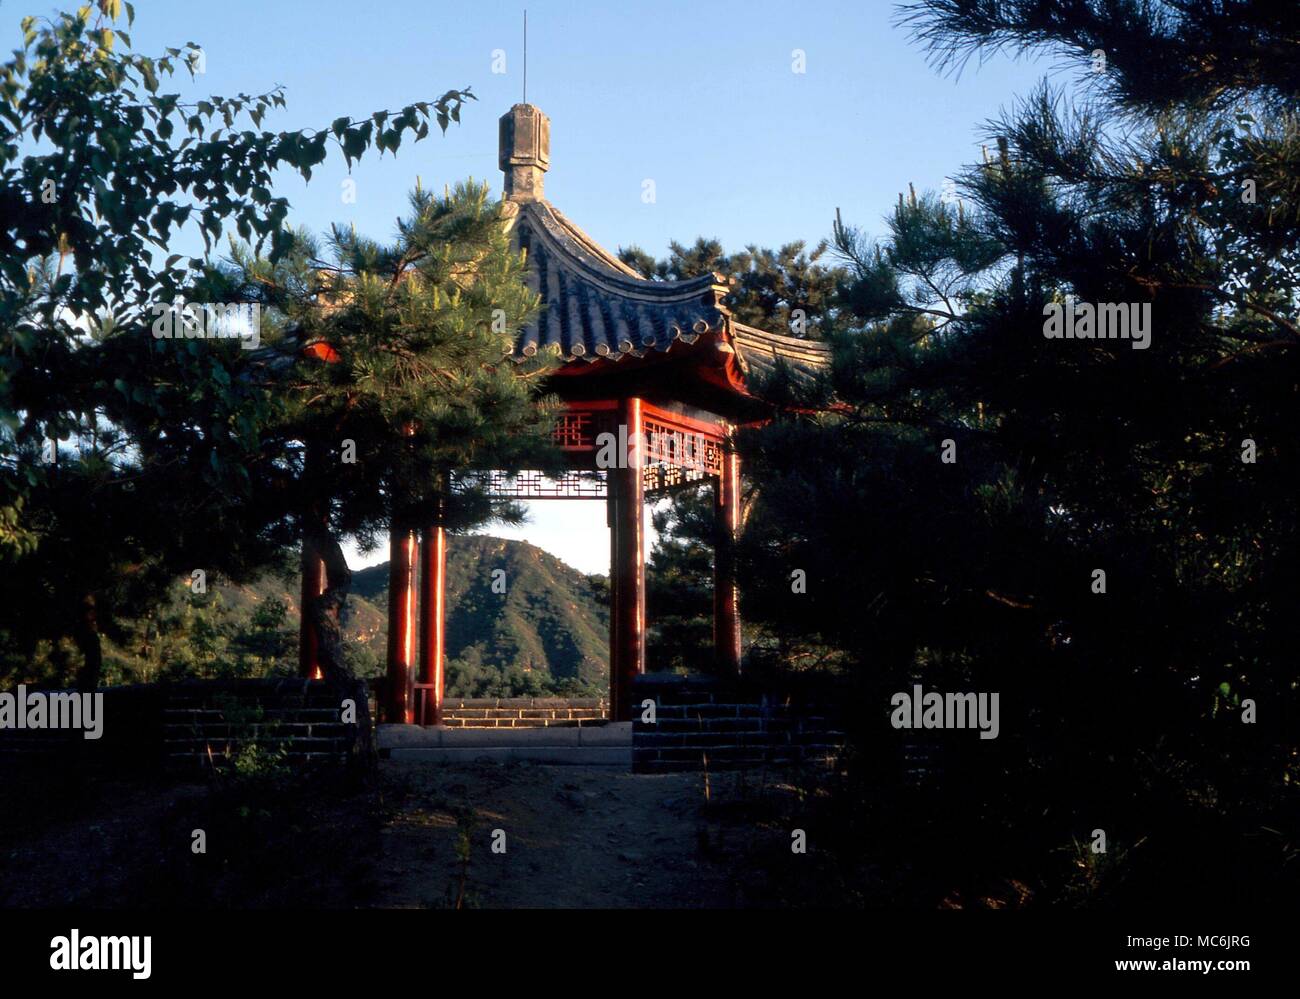 FENG SHUI - Chinese pavilion on hill top, its form completing the 'dragon' shape of the hill, as required by perfect Feng Shui. The pavilion is located near the Great Wall, north of Beijing Stock Photo